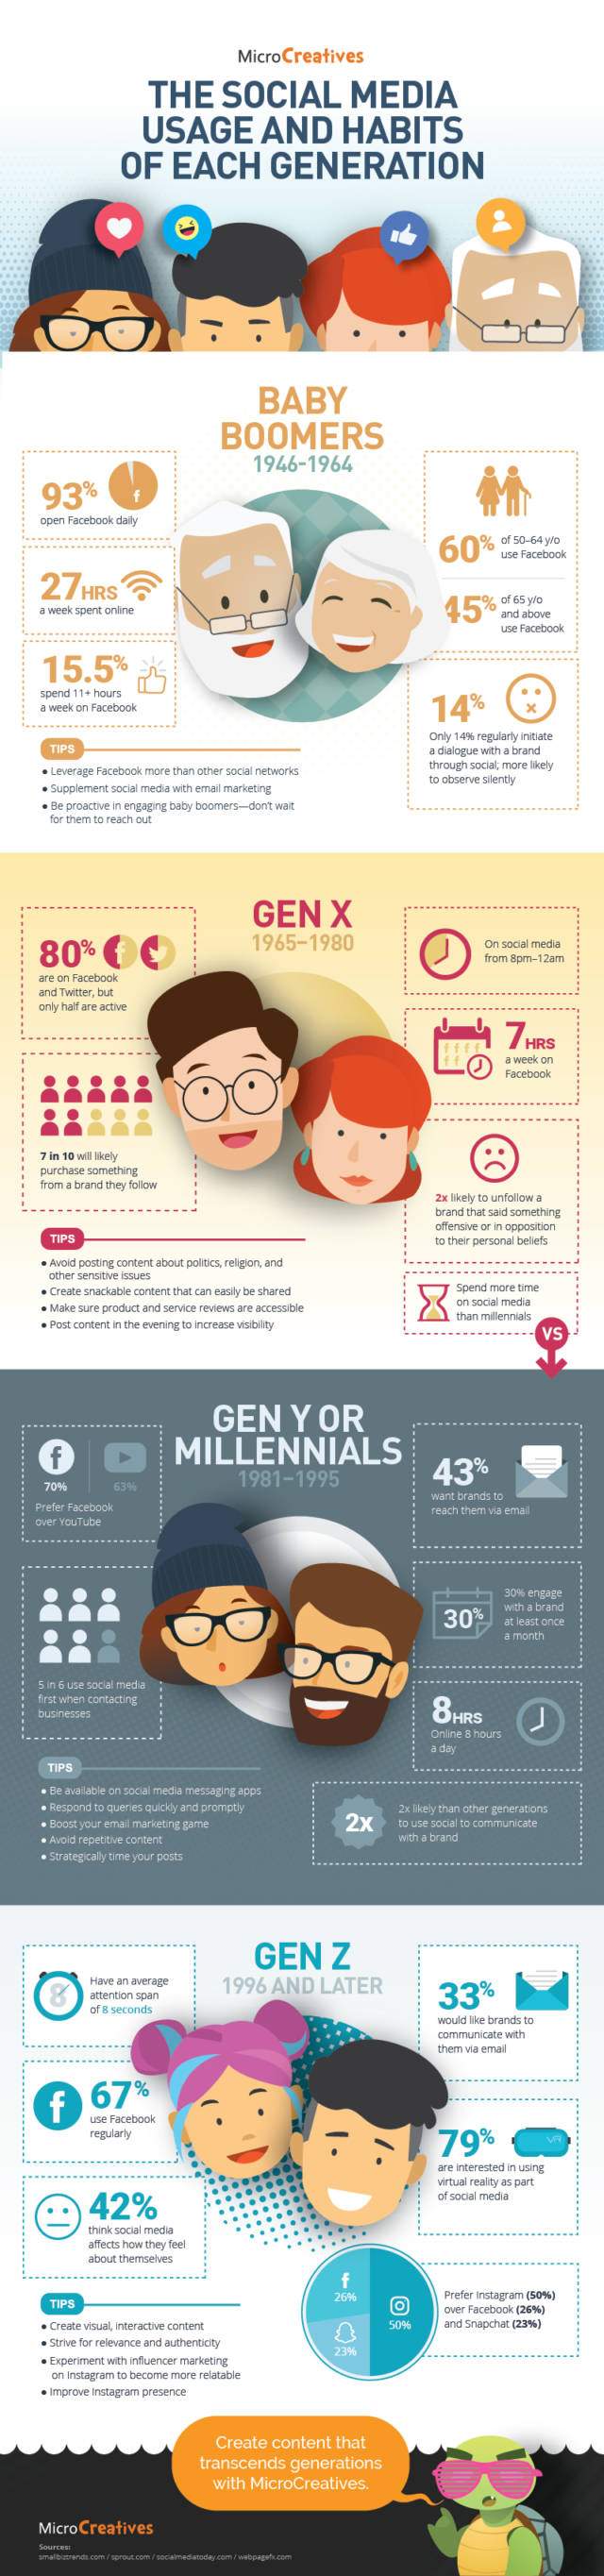 Social Media Habits and Usage of Each Generation